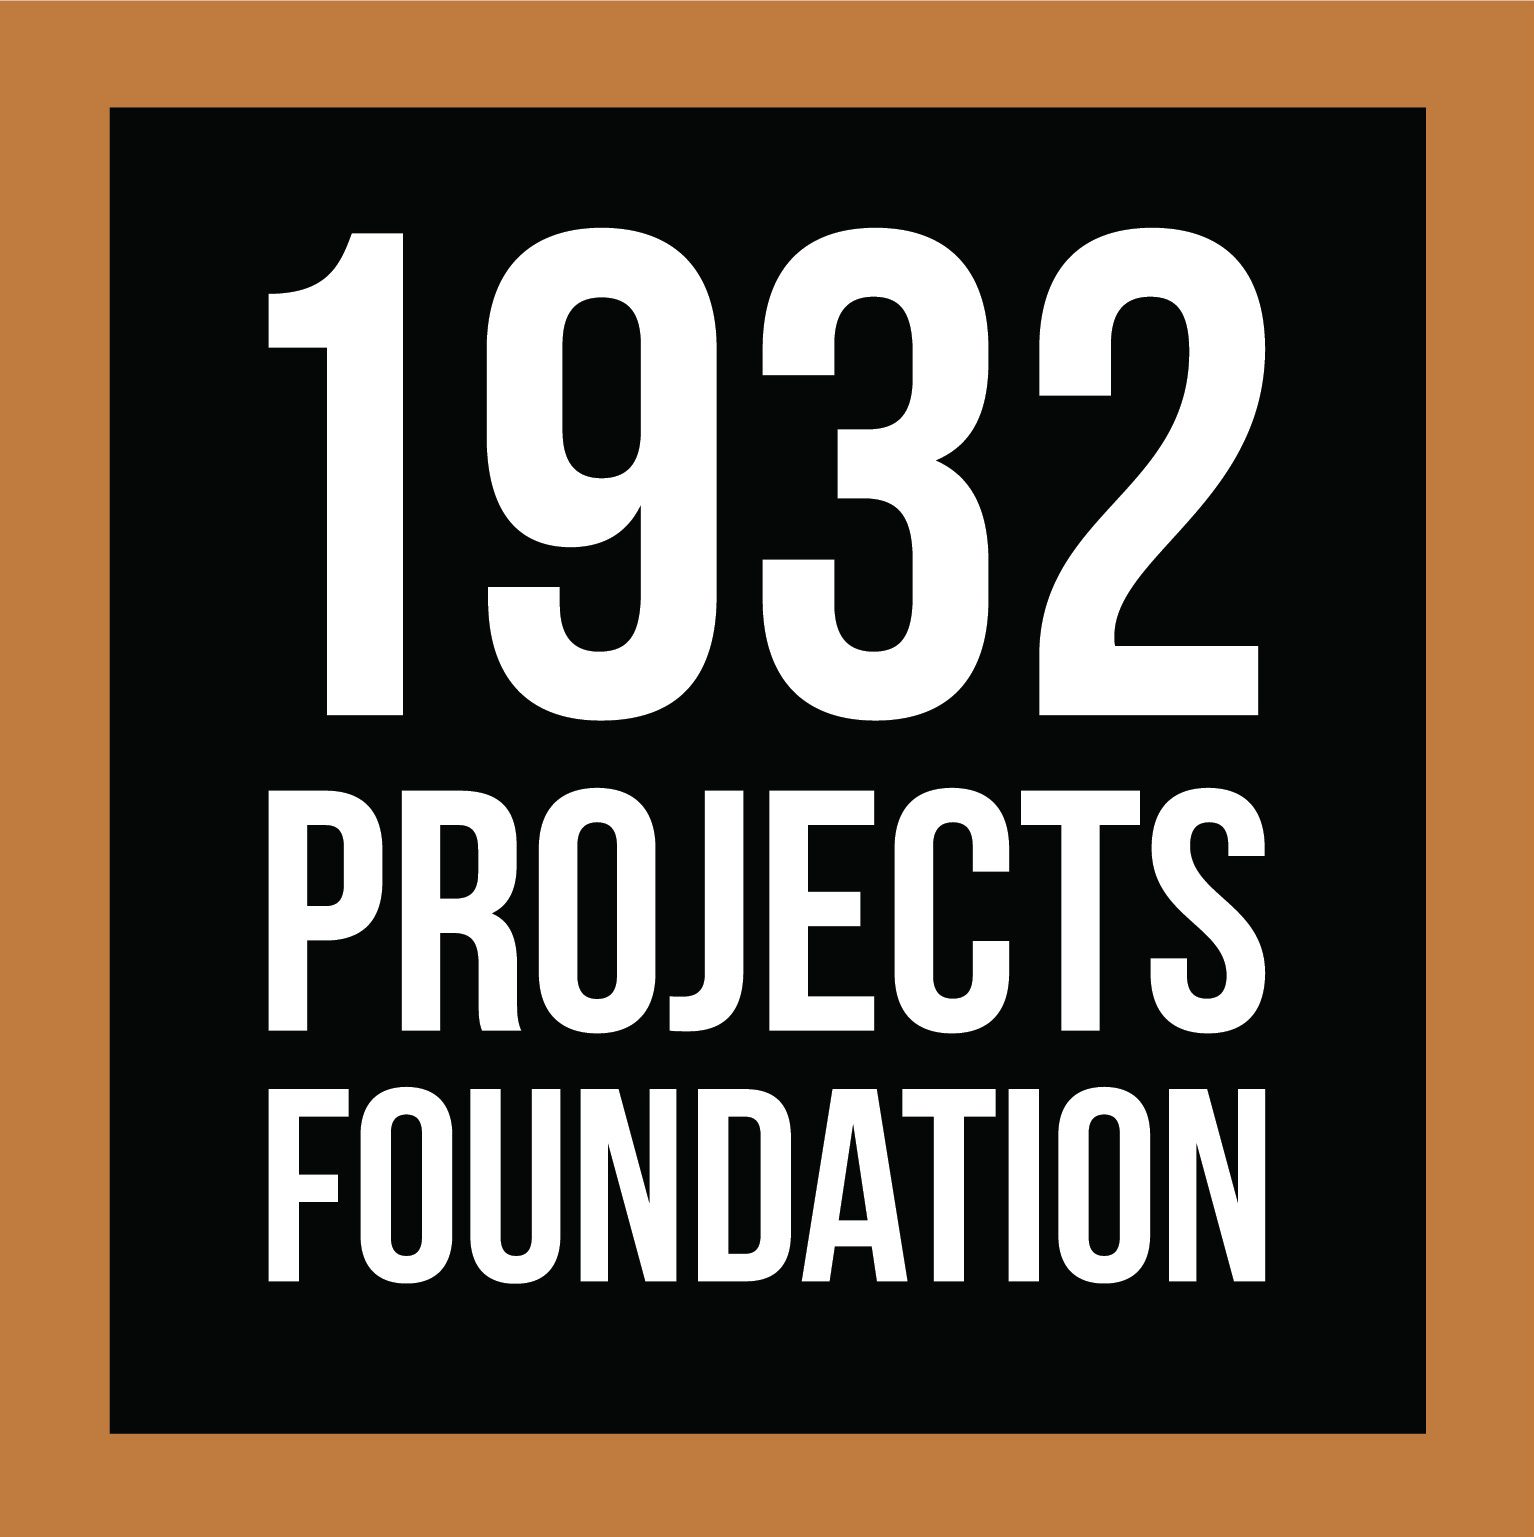 1932 Projects Foundation